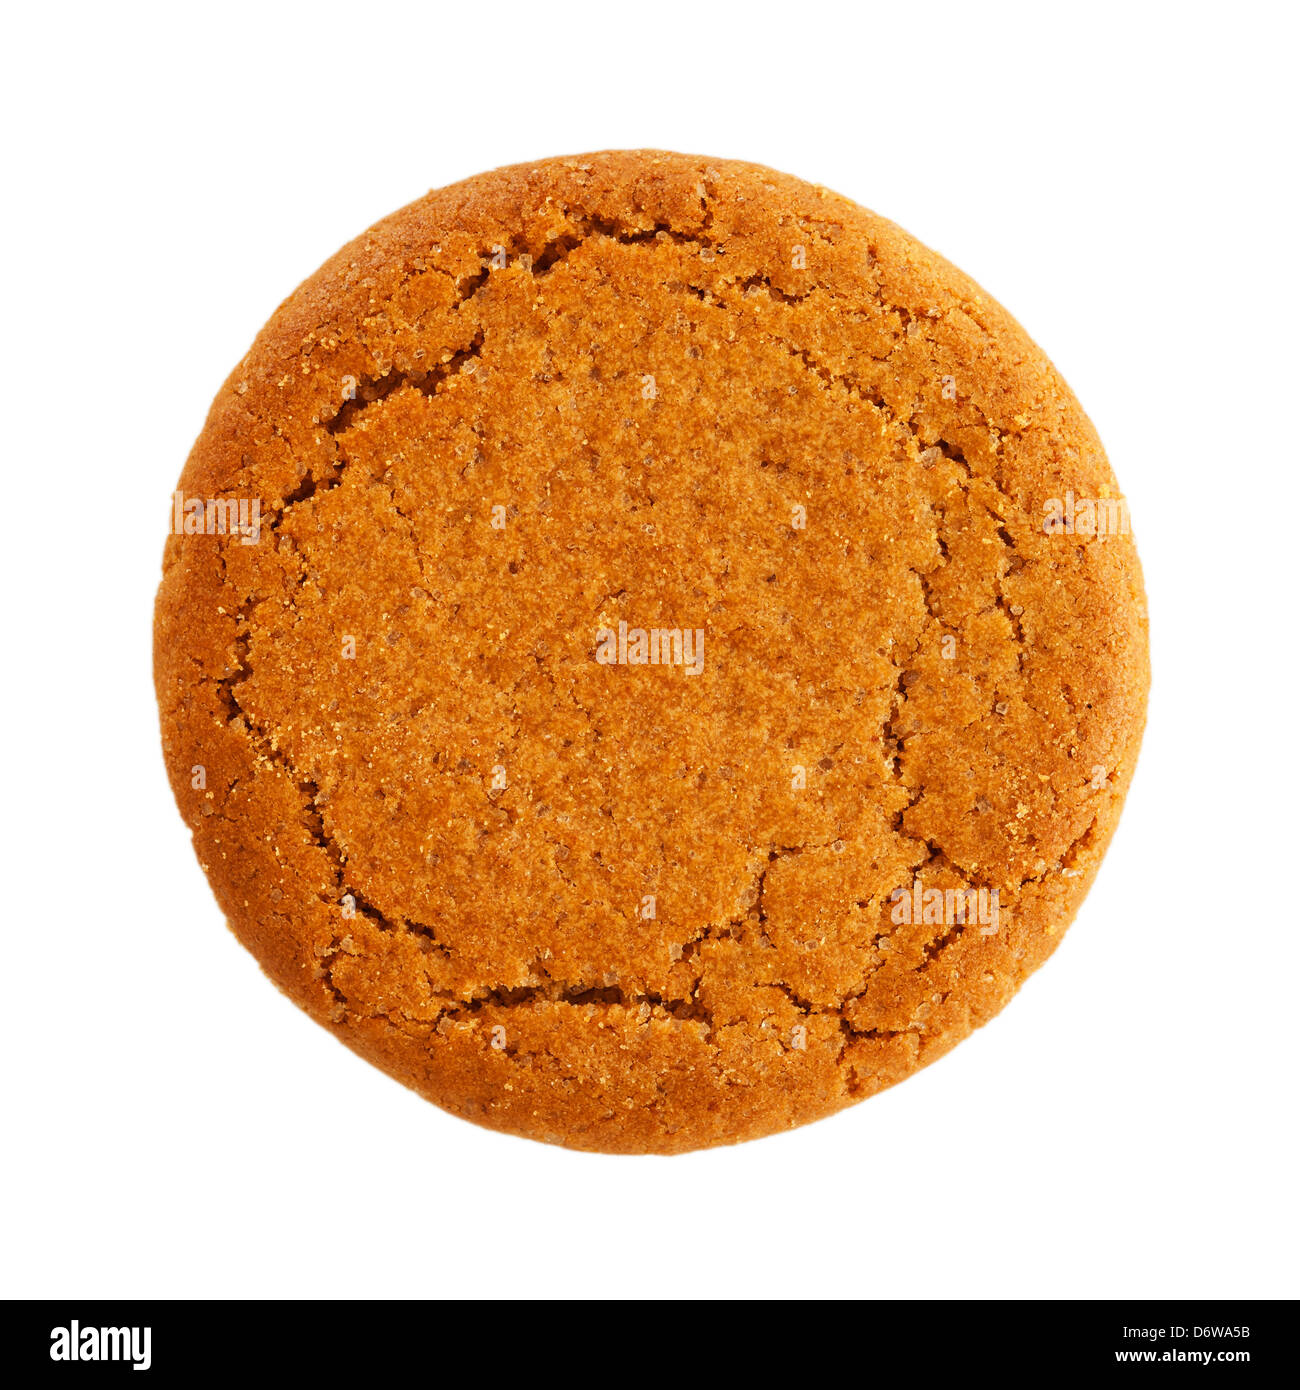 A Mcvitie's ginger Nut biscuit on a white background Stock Photo